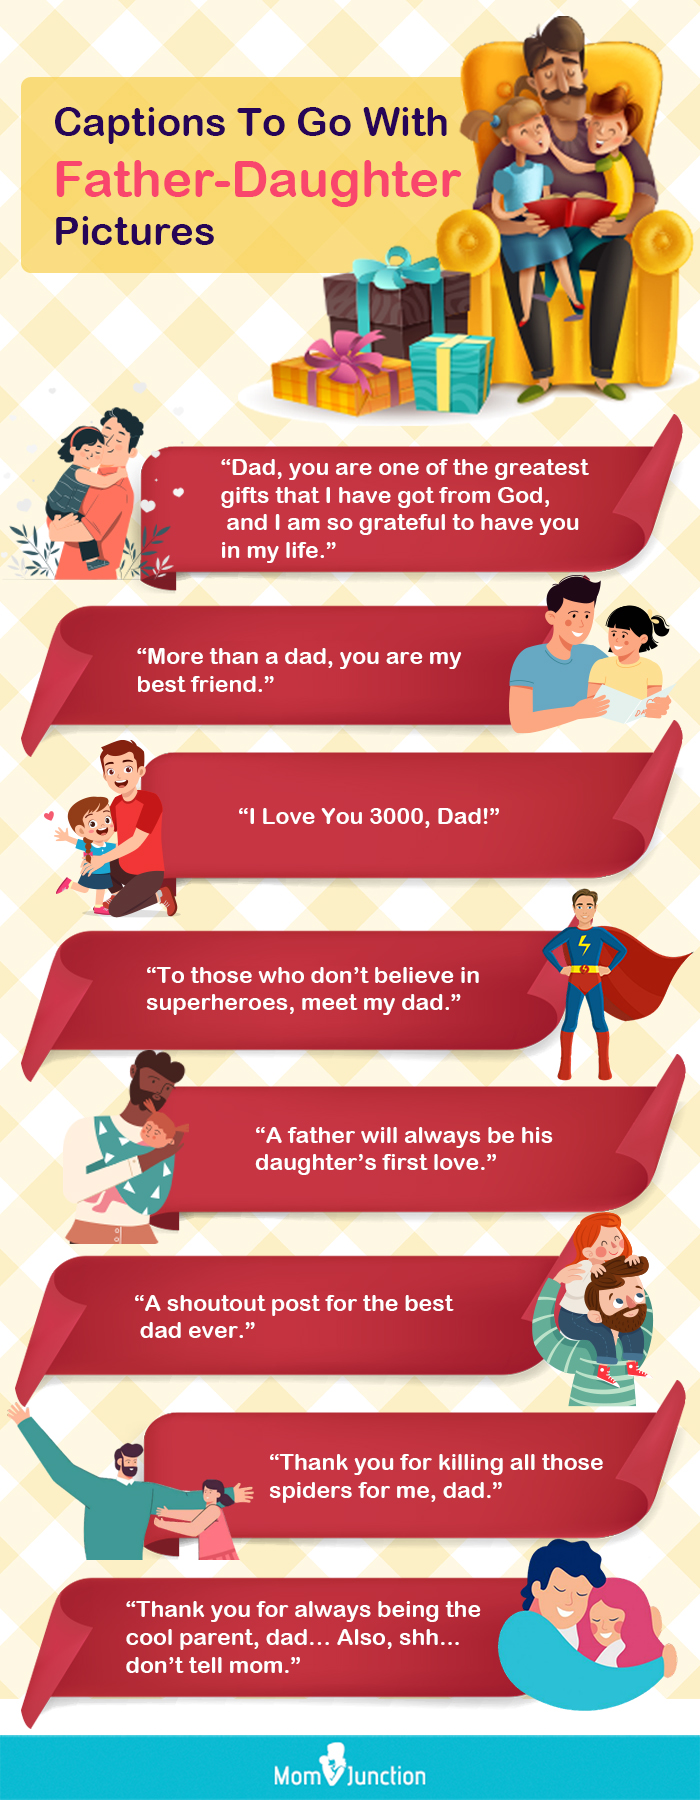 heart-touching father-daughter captions (infographic)